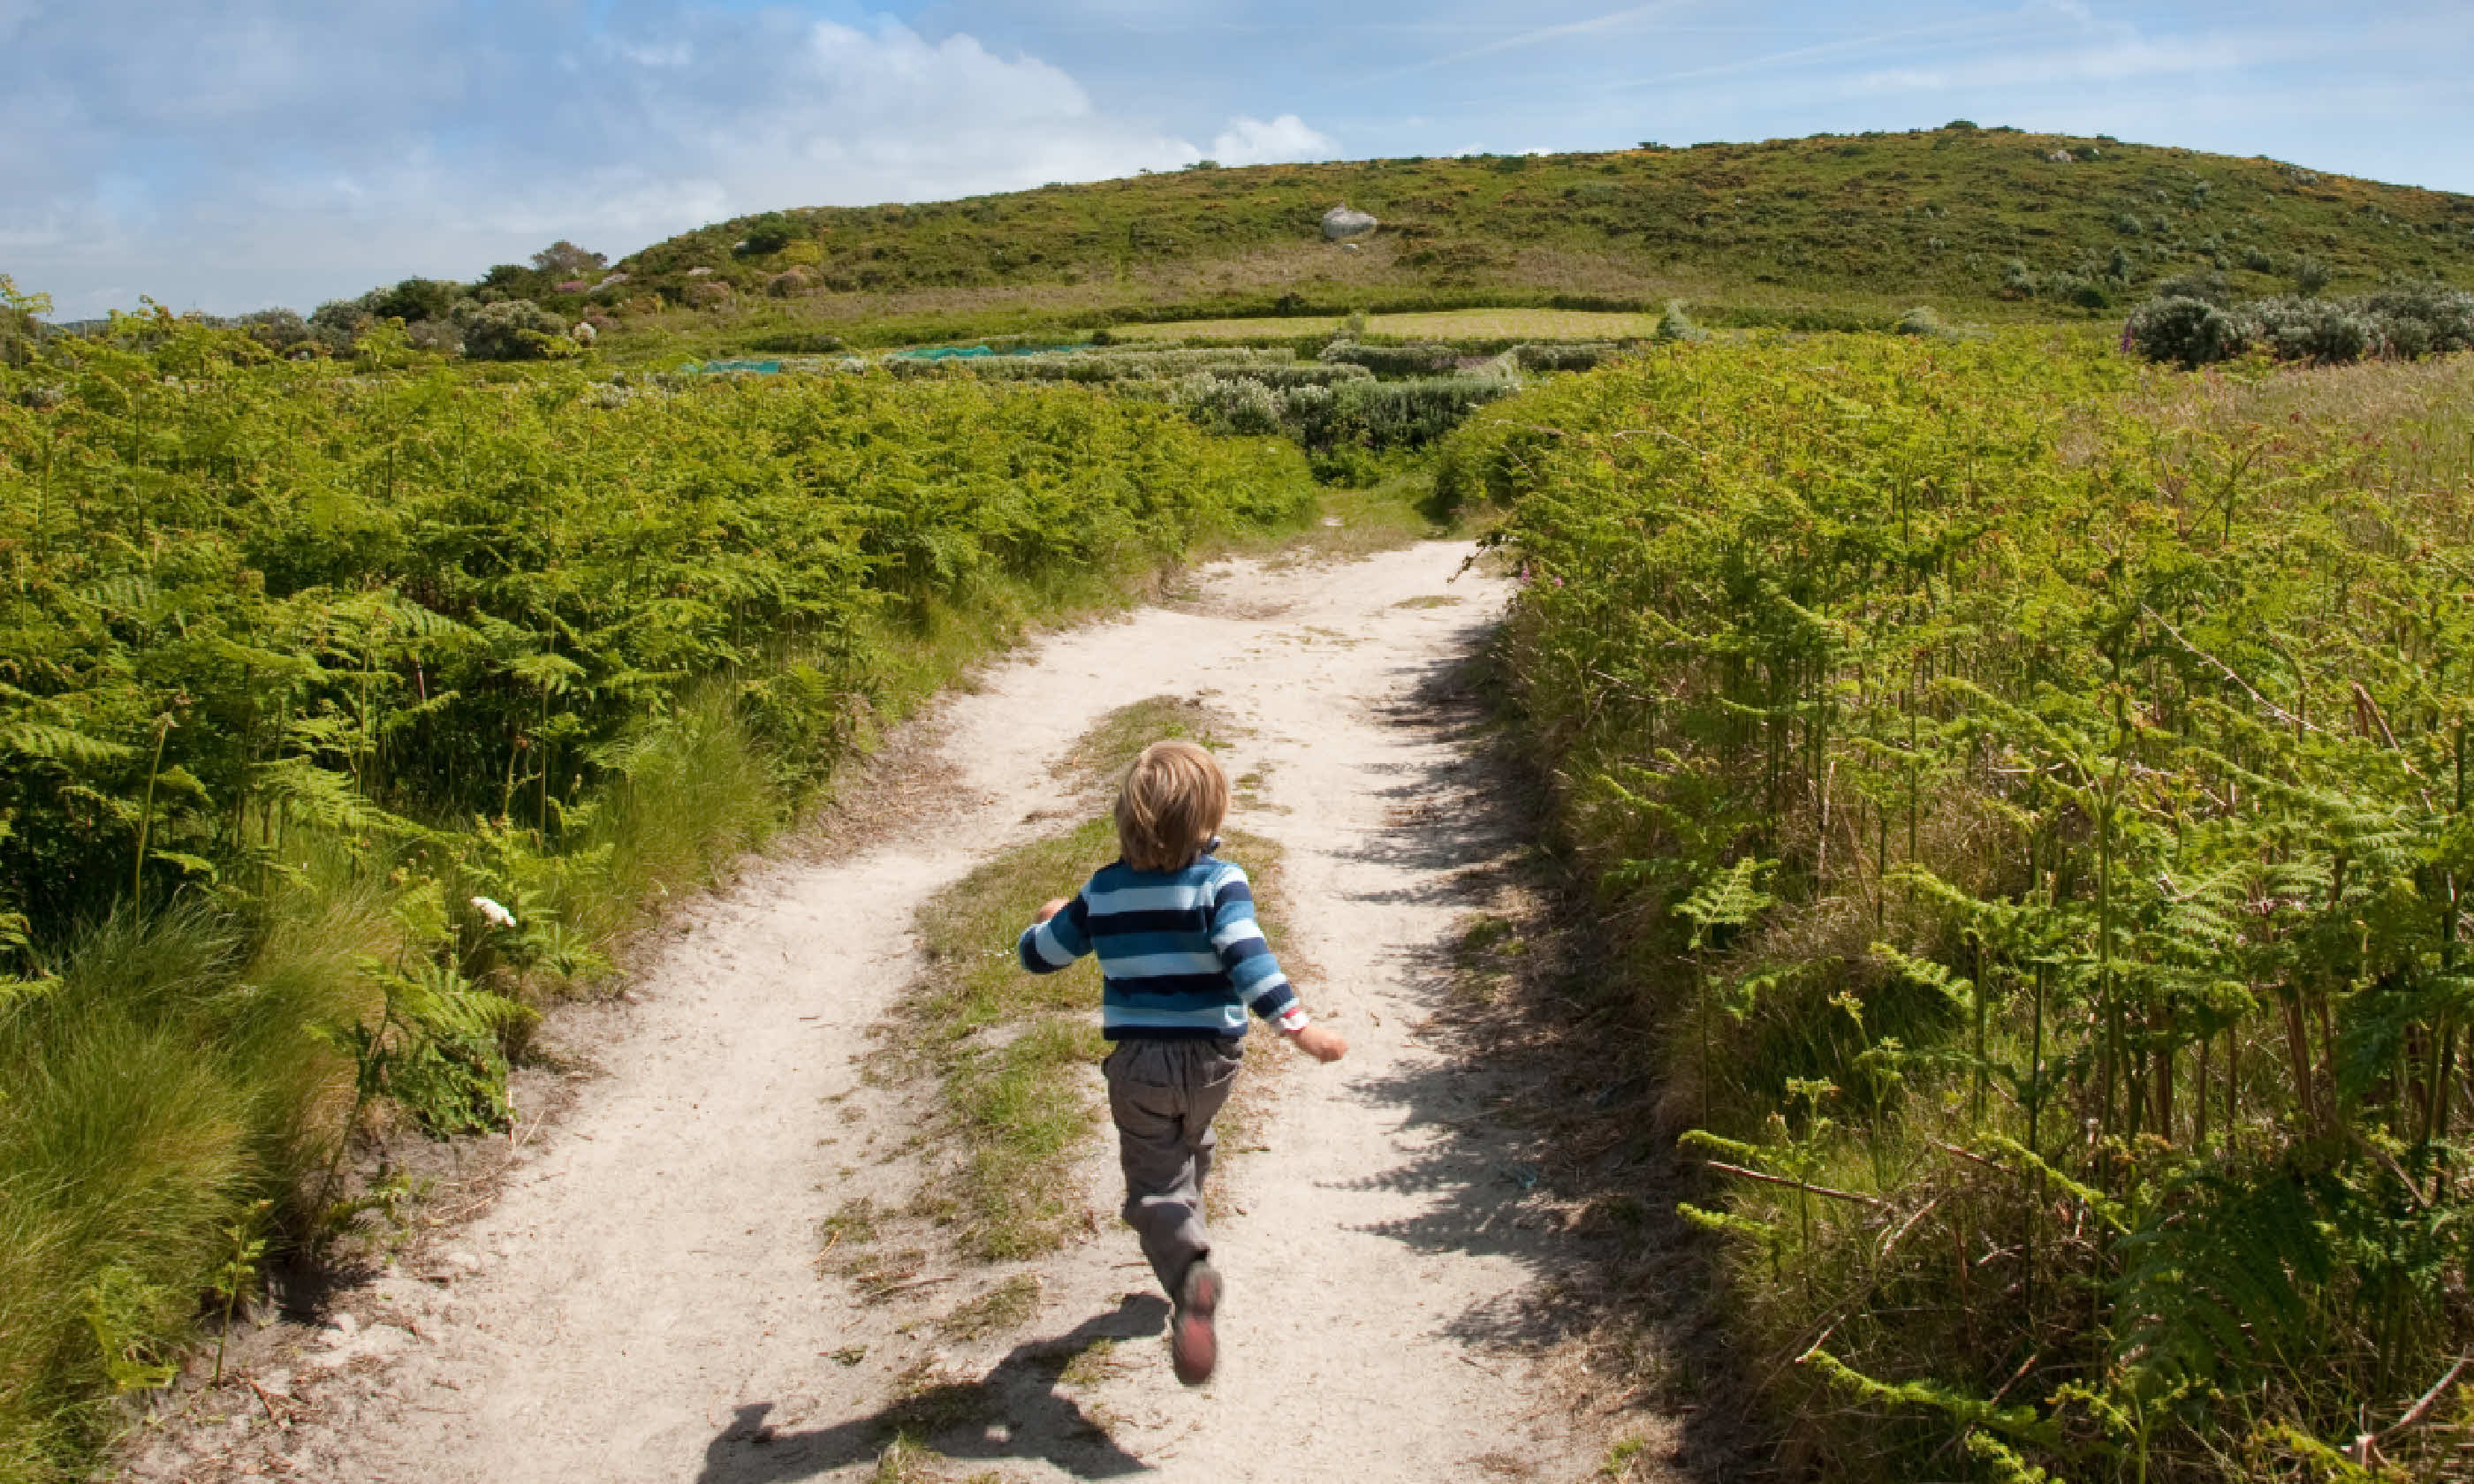 Child running on holiday in England (Shutterstock: see credit below)